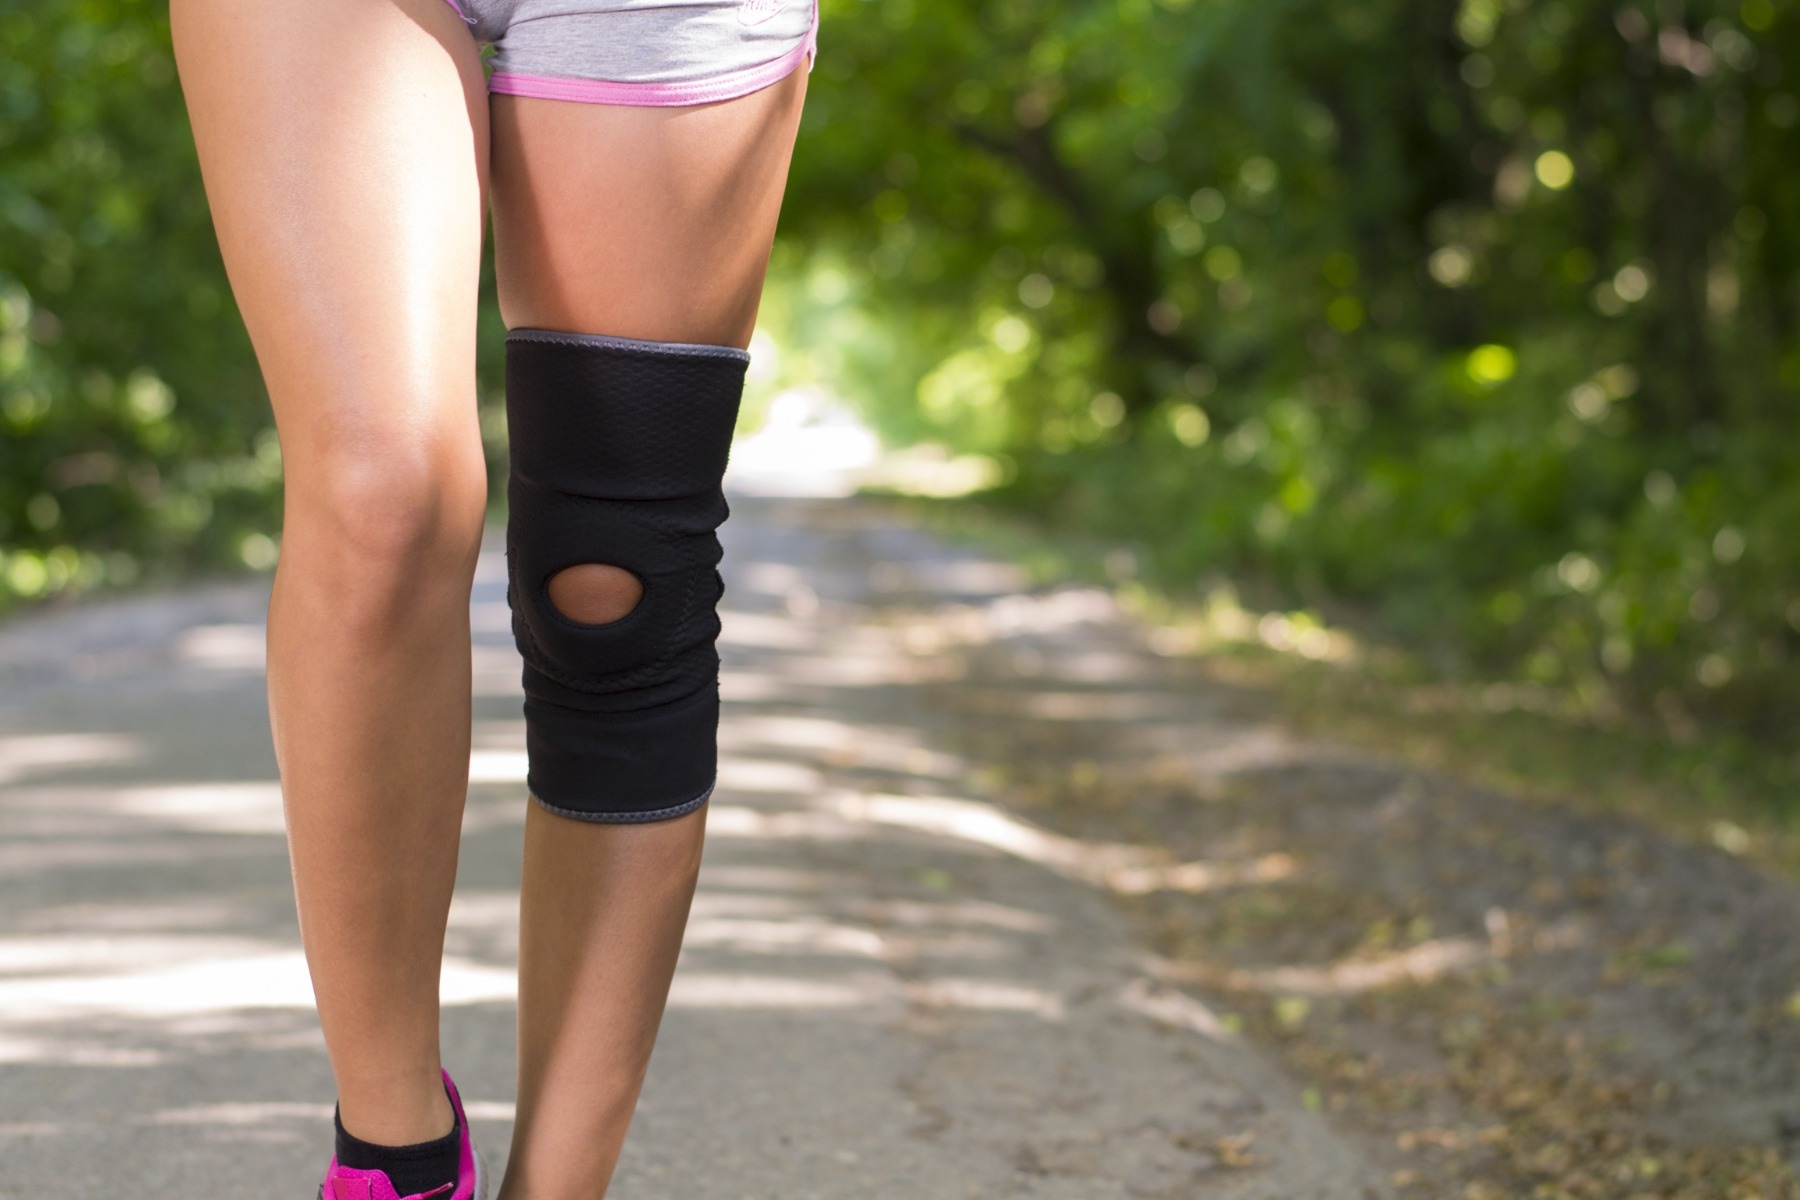 What You Need to Know Before Buying a Knee Brace